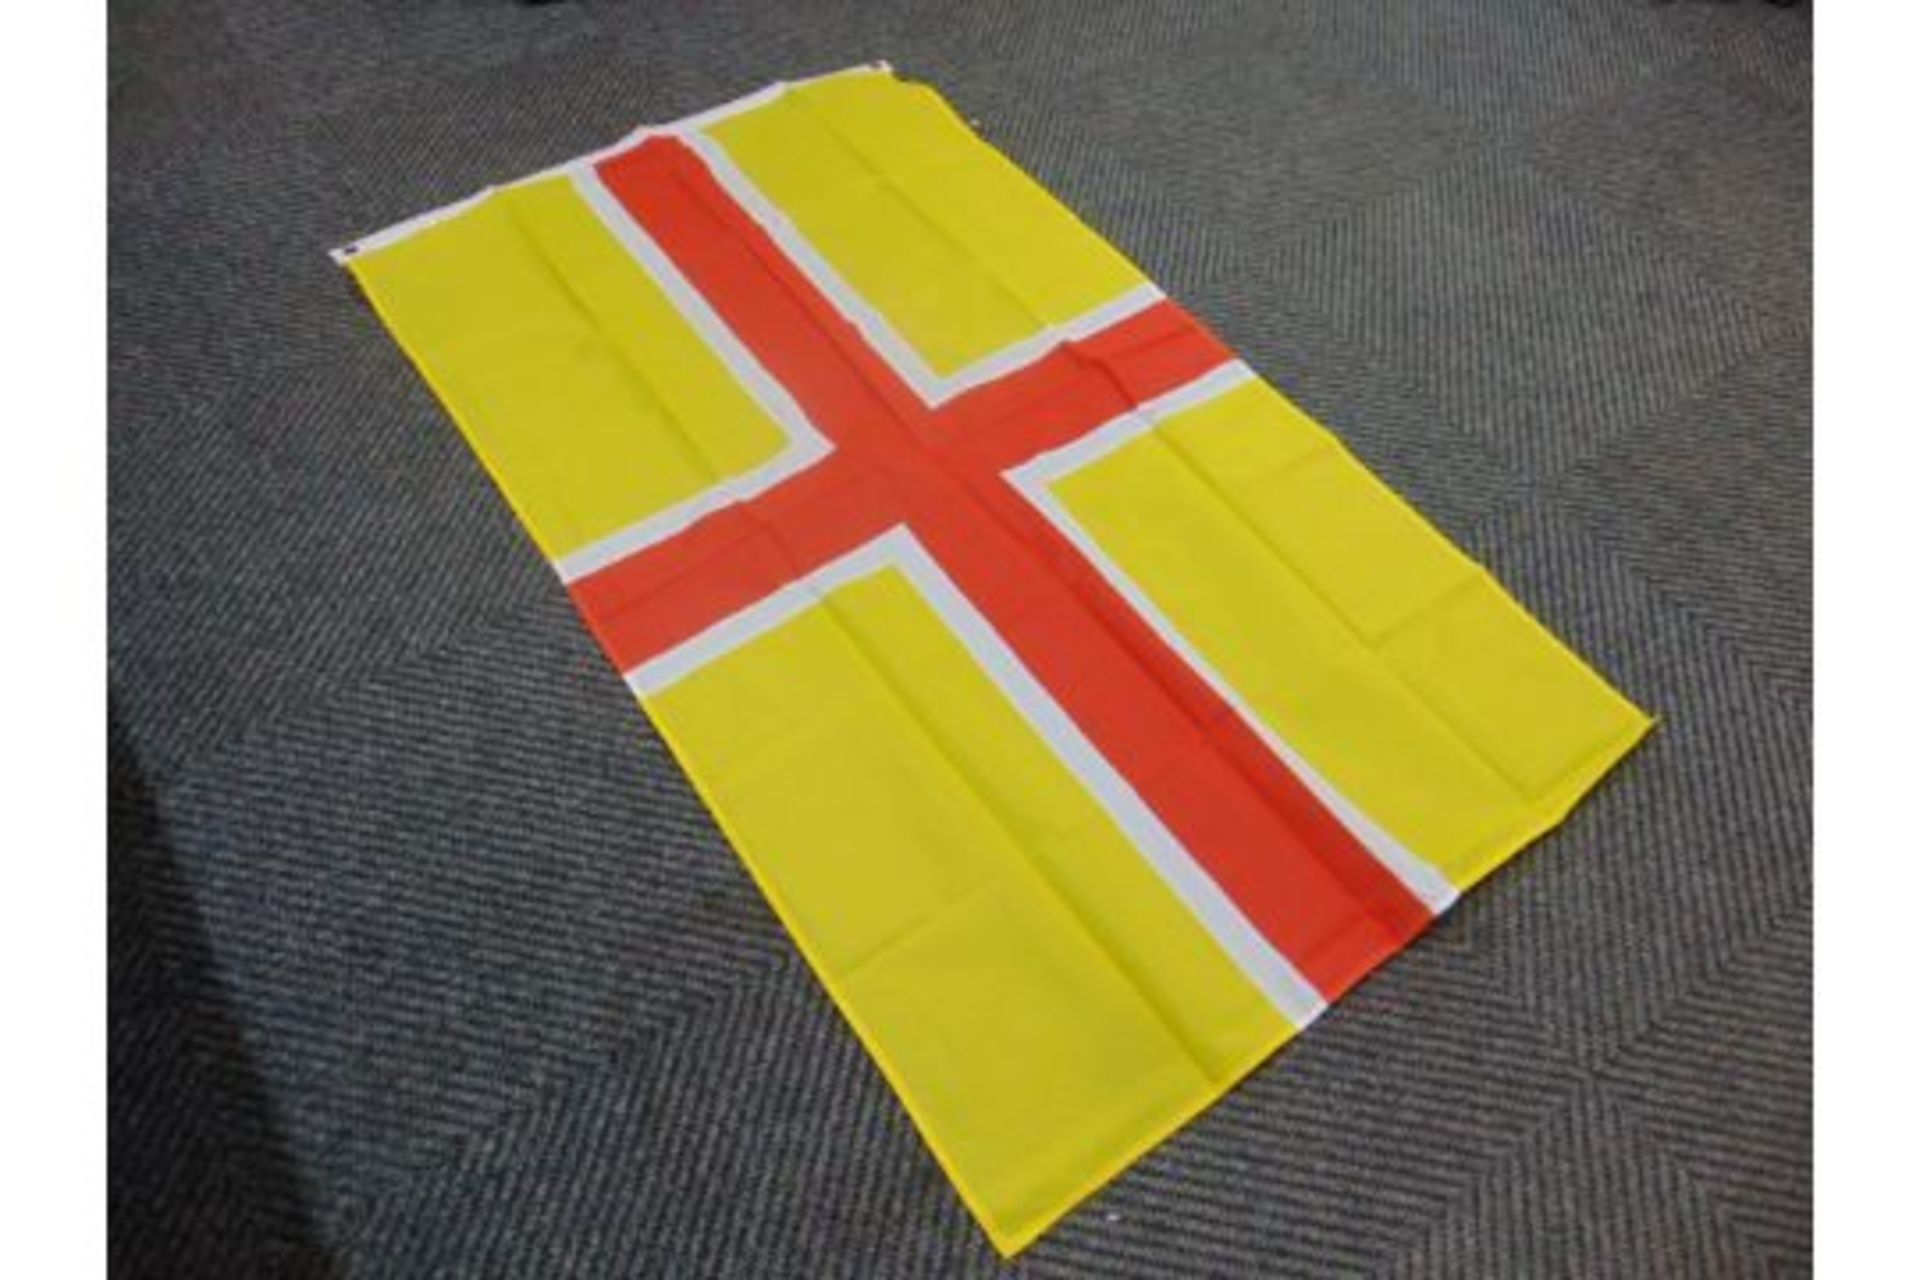 42 Commando Royal Marines Flag 5ft x 3ft with Metal Eyelets - Image 3 of 3